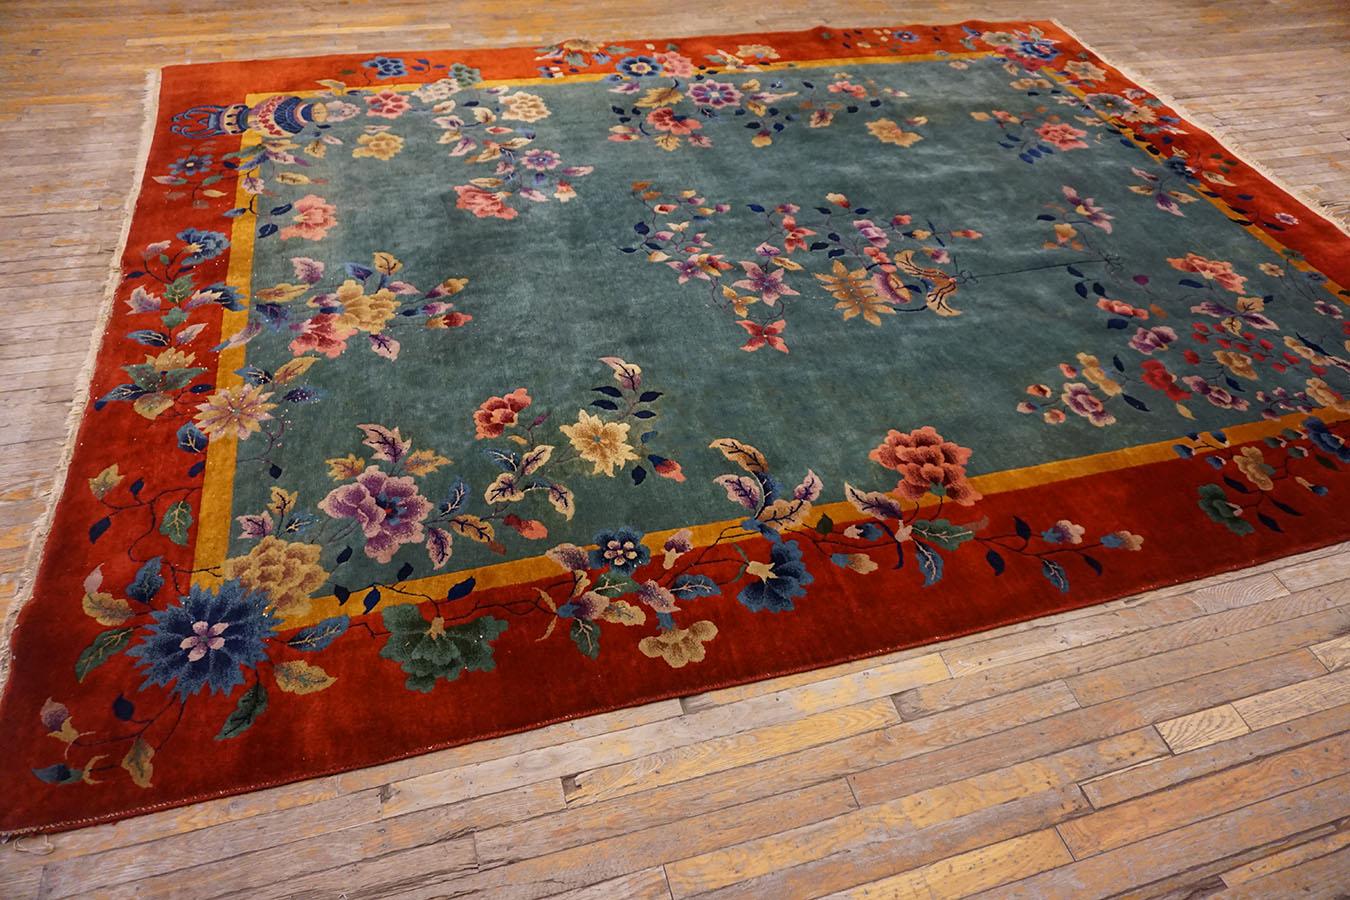 Hand-Knotted 1920s Chinese Art Deco Carpet 10' 8